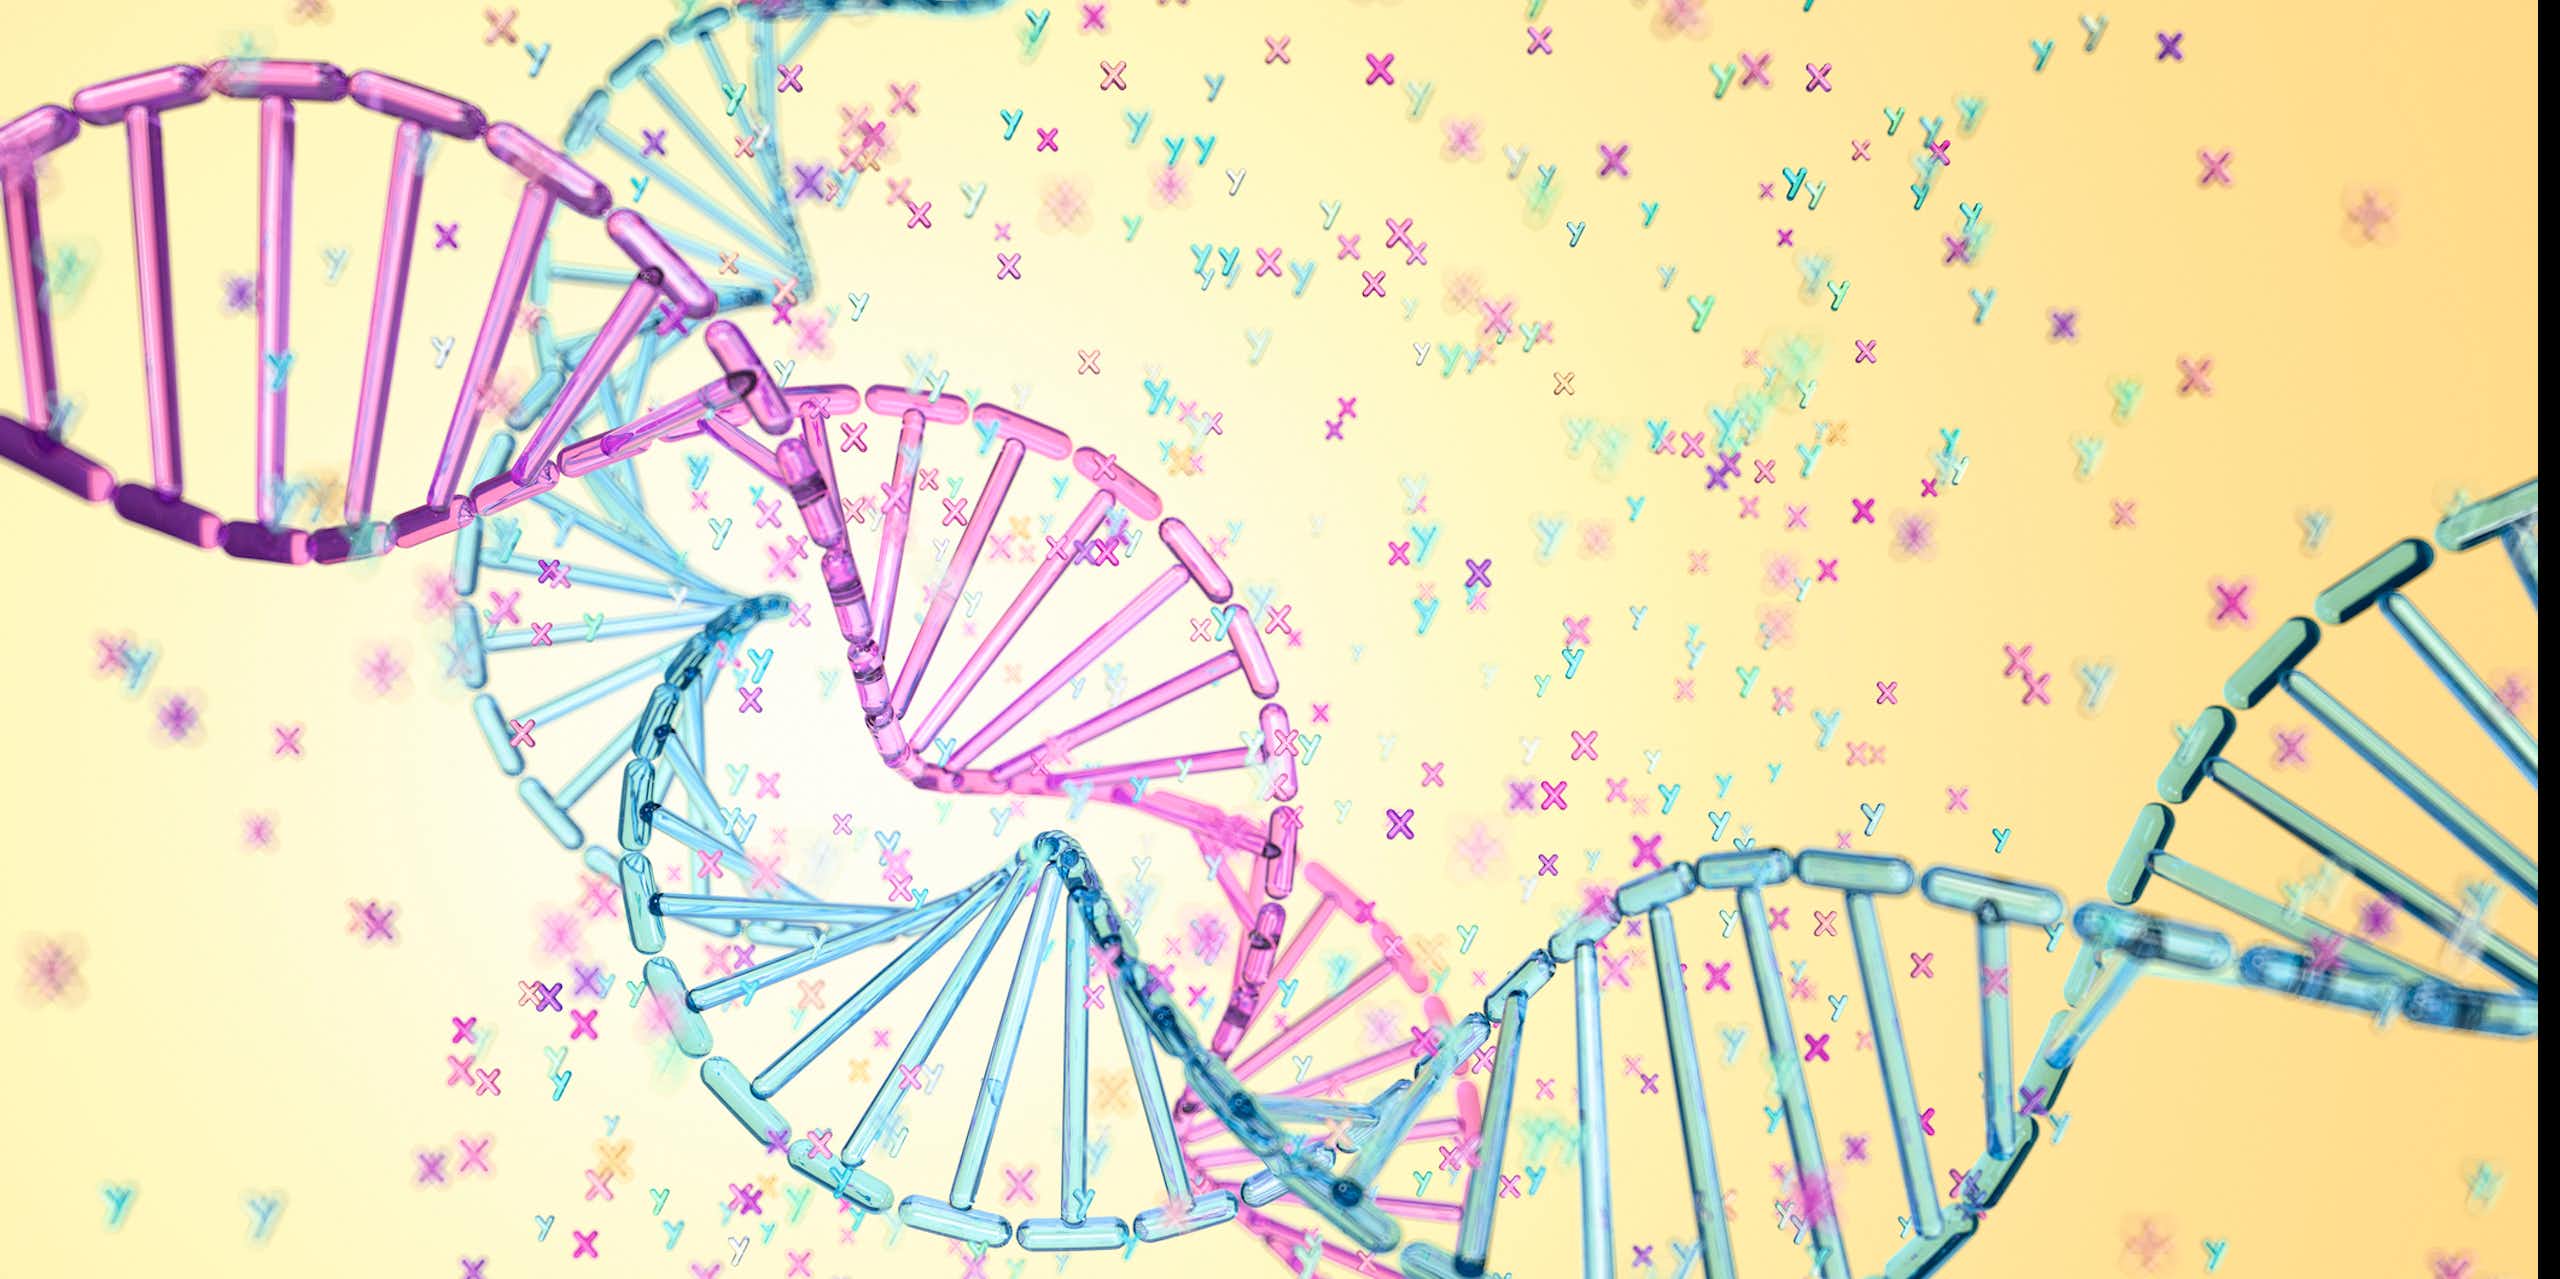 Illustration of one pink and one blue DNA helices intertwining, with pink X's and blue Y's floating around the background